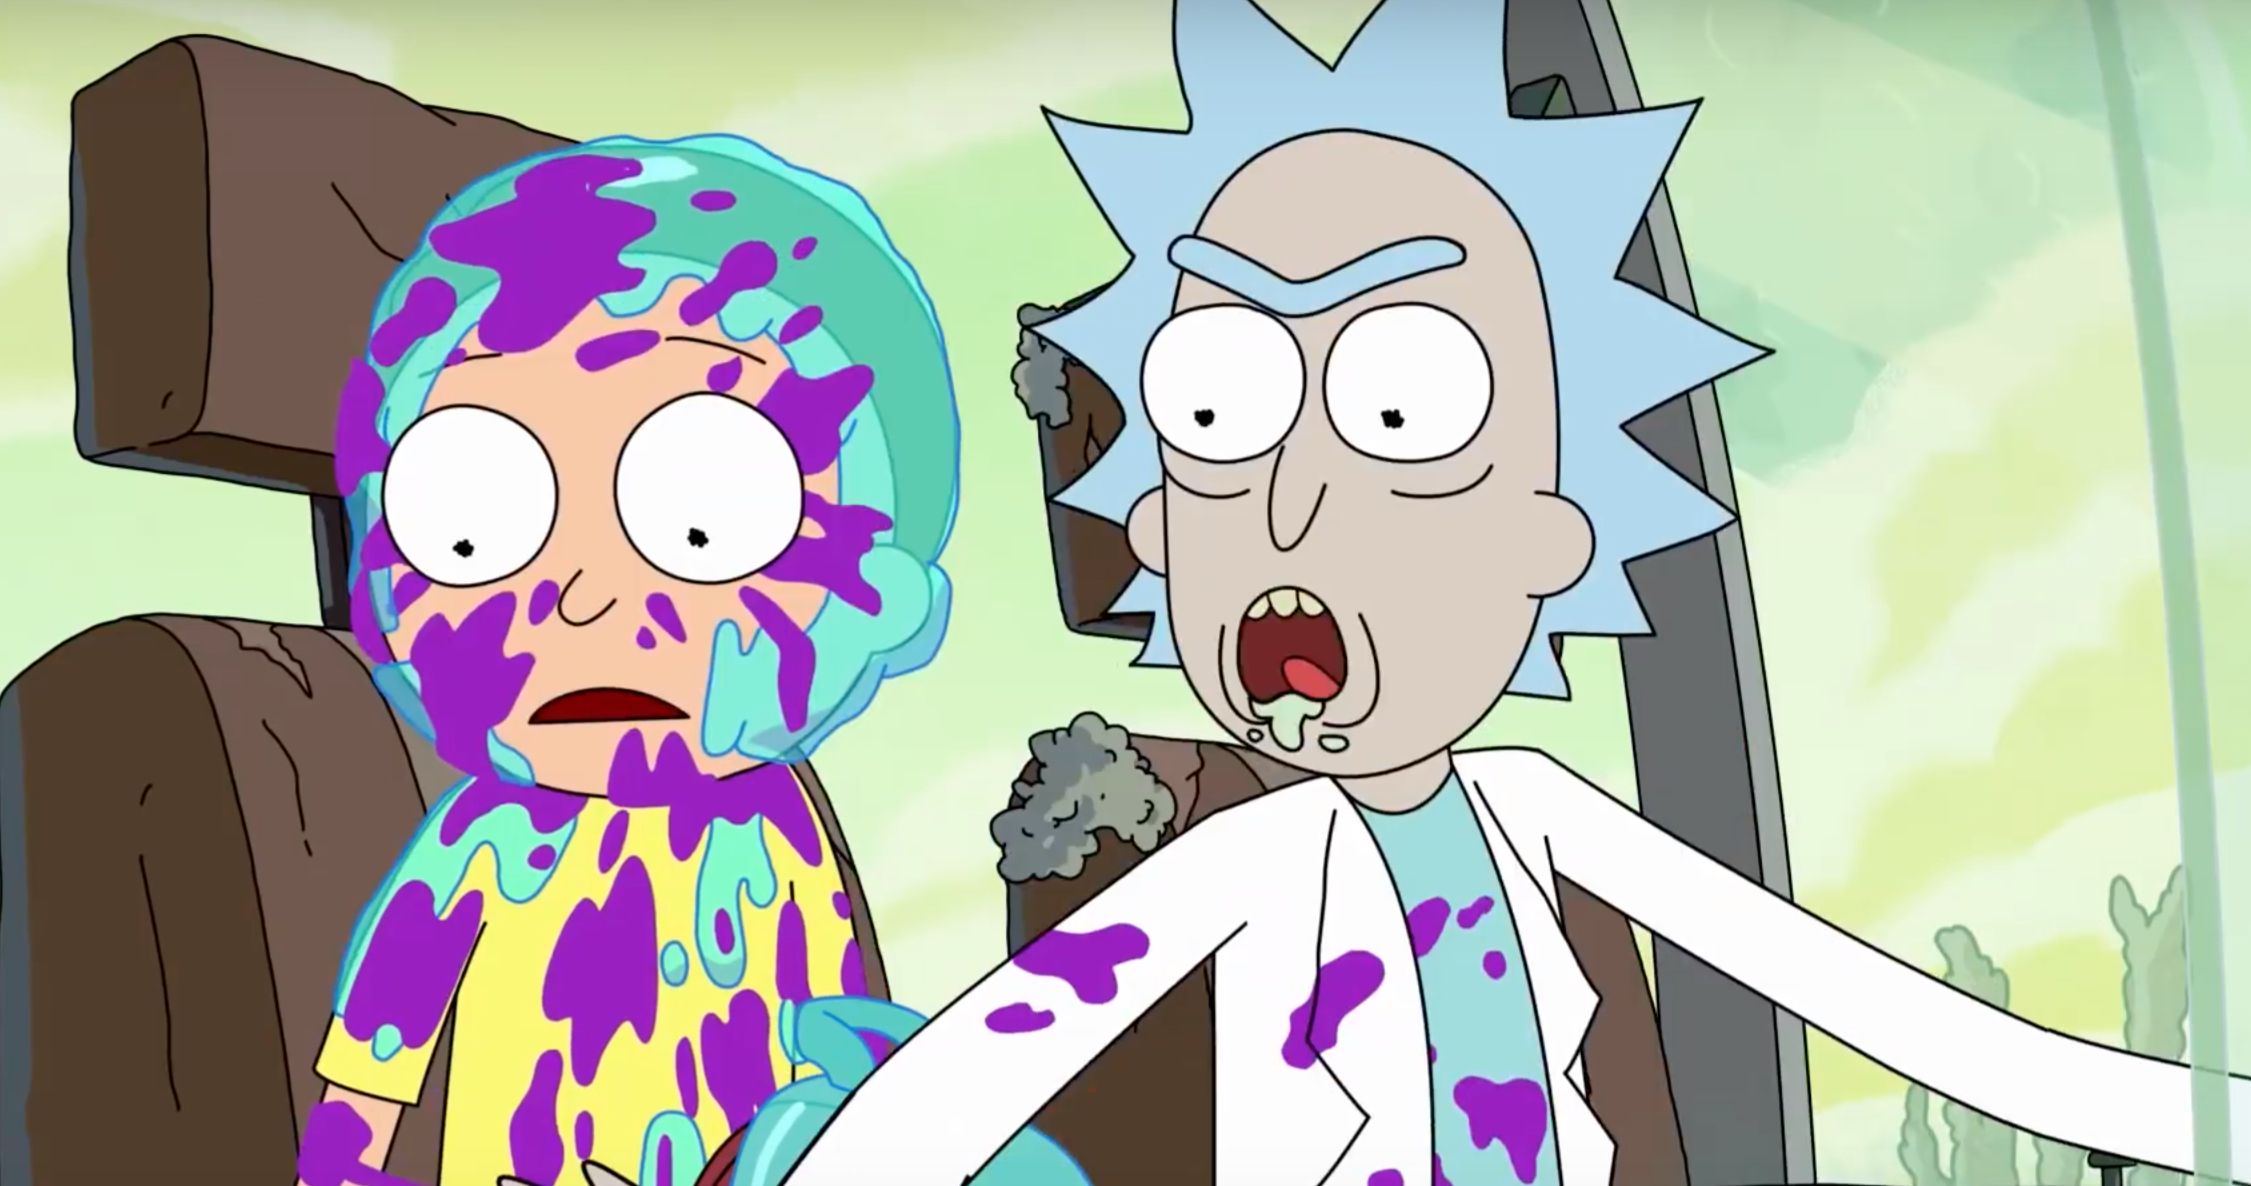 Rick and Morty Season 4 Trailer Arrives, Premiere Date Announced